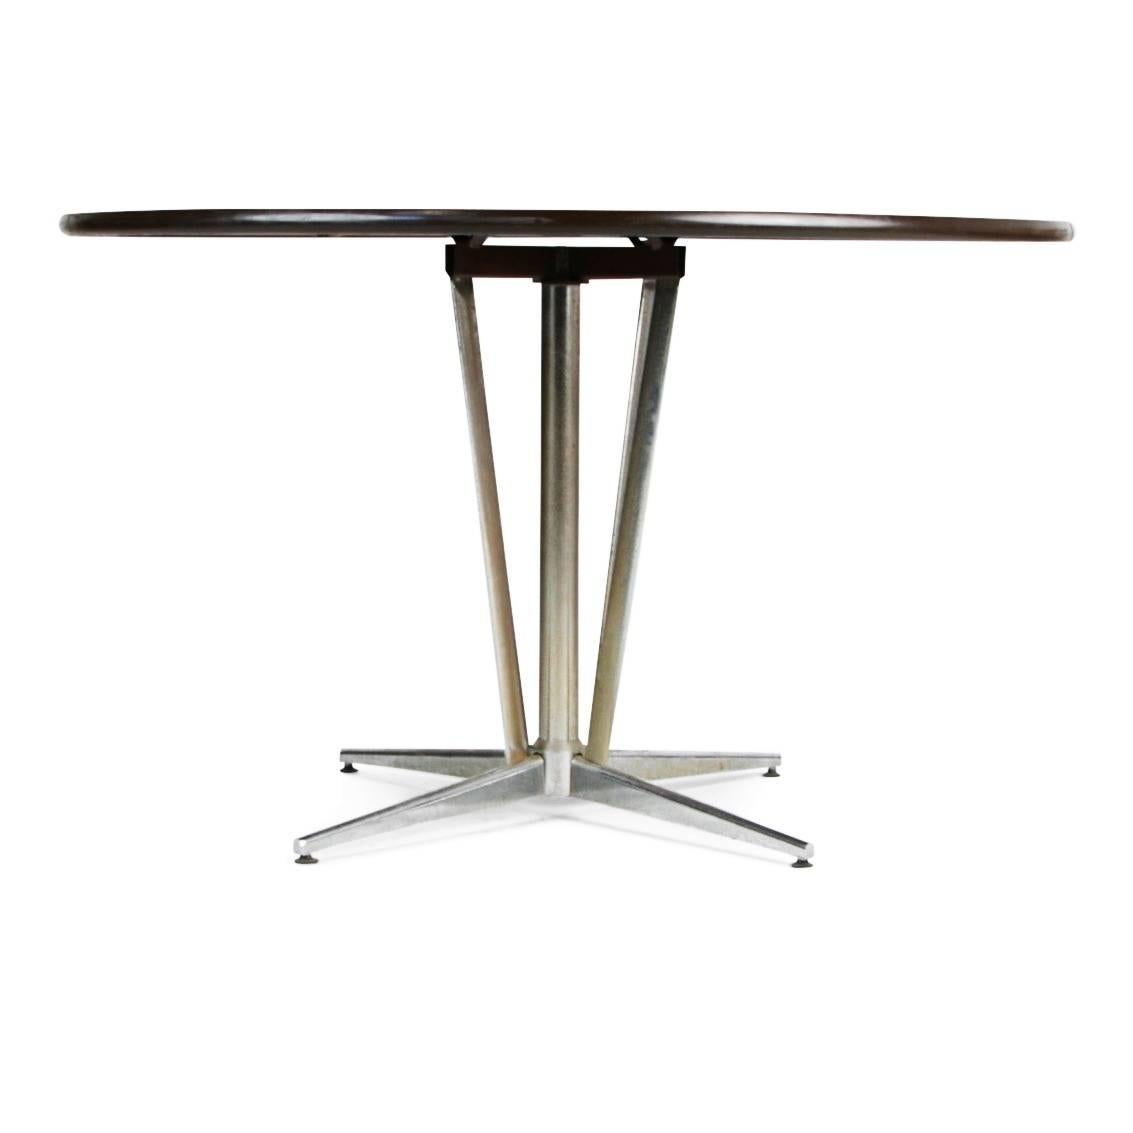 Mid-Century modern table supported by a chrome base and topped with an attractively decorated surface featuring hand-hammered geometric copper designs. With copper being a top trend currently, this beautiful piece will dazzle in any space. 

This